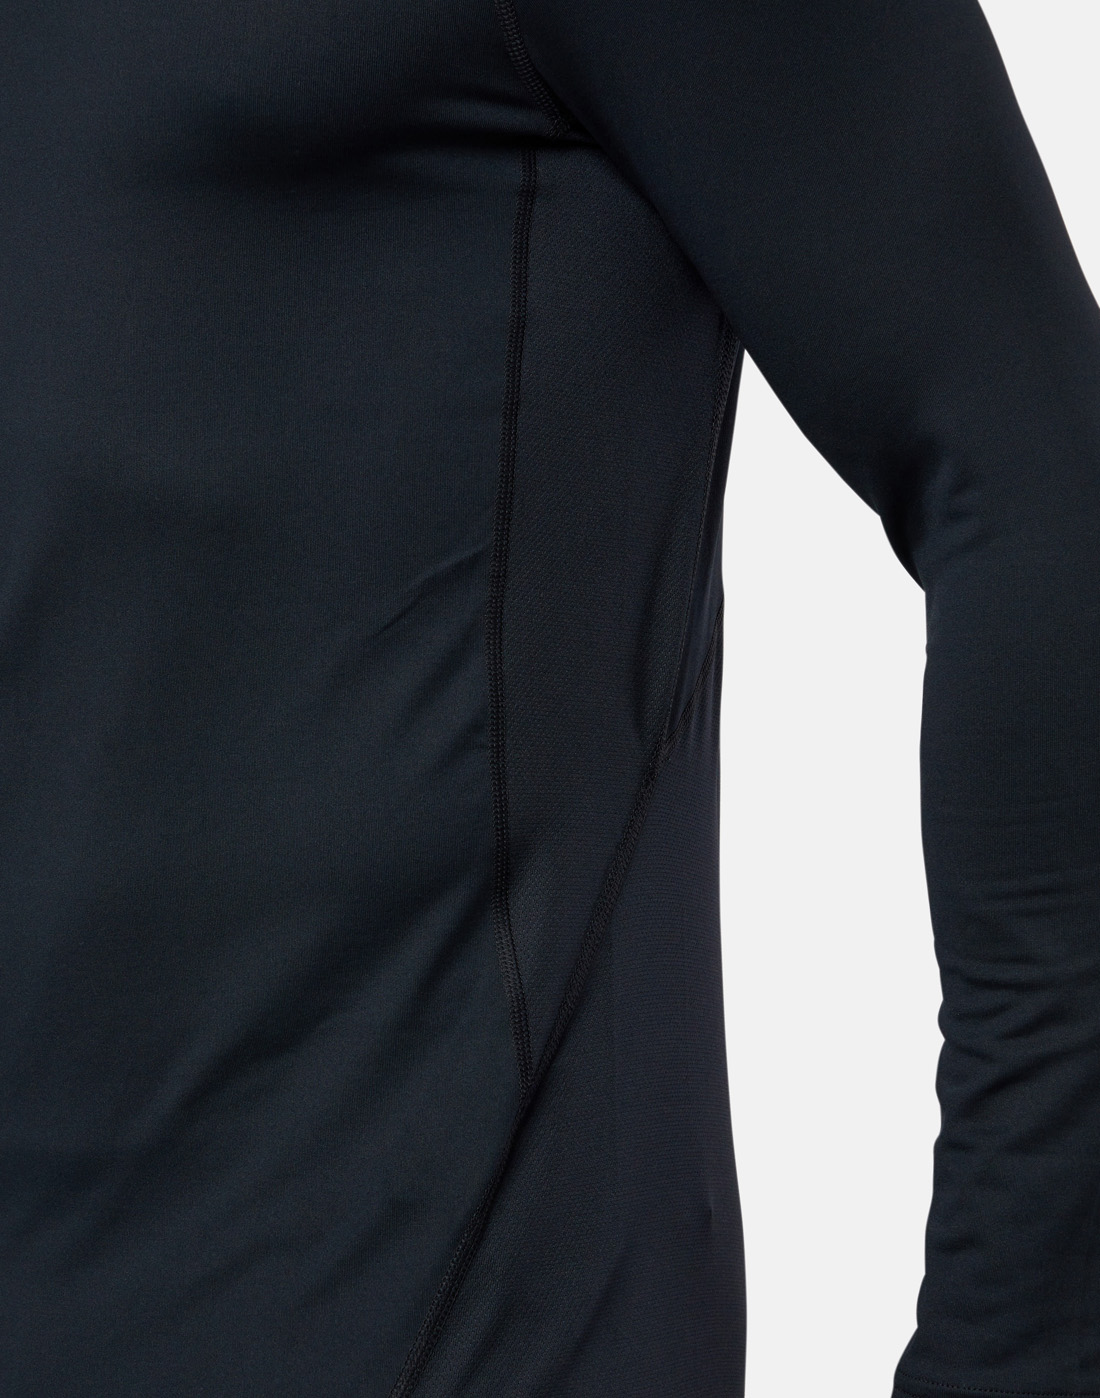 Under Armour Mens ColdGear Armour Fitted Crew Top - Black | Life Style ...